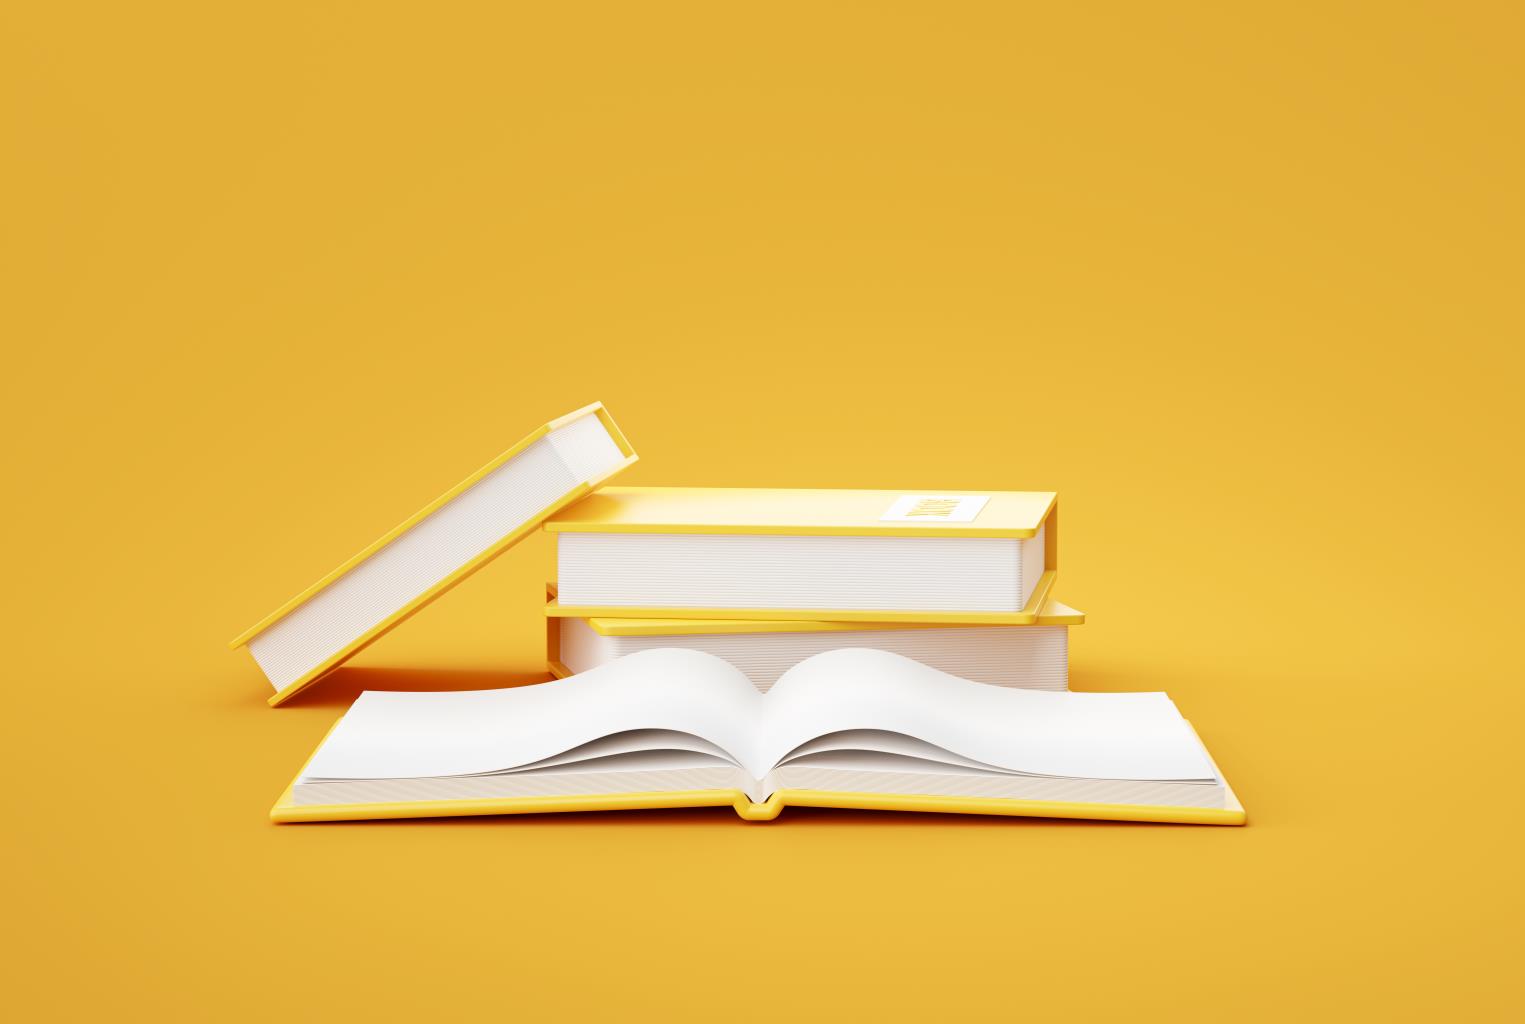 stack_books_yellow_background_education_concept_3d_rendering.jpg